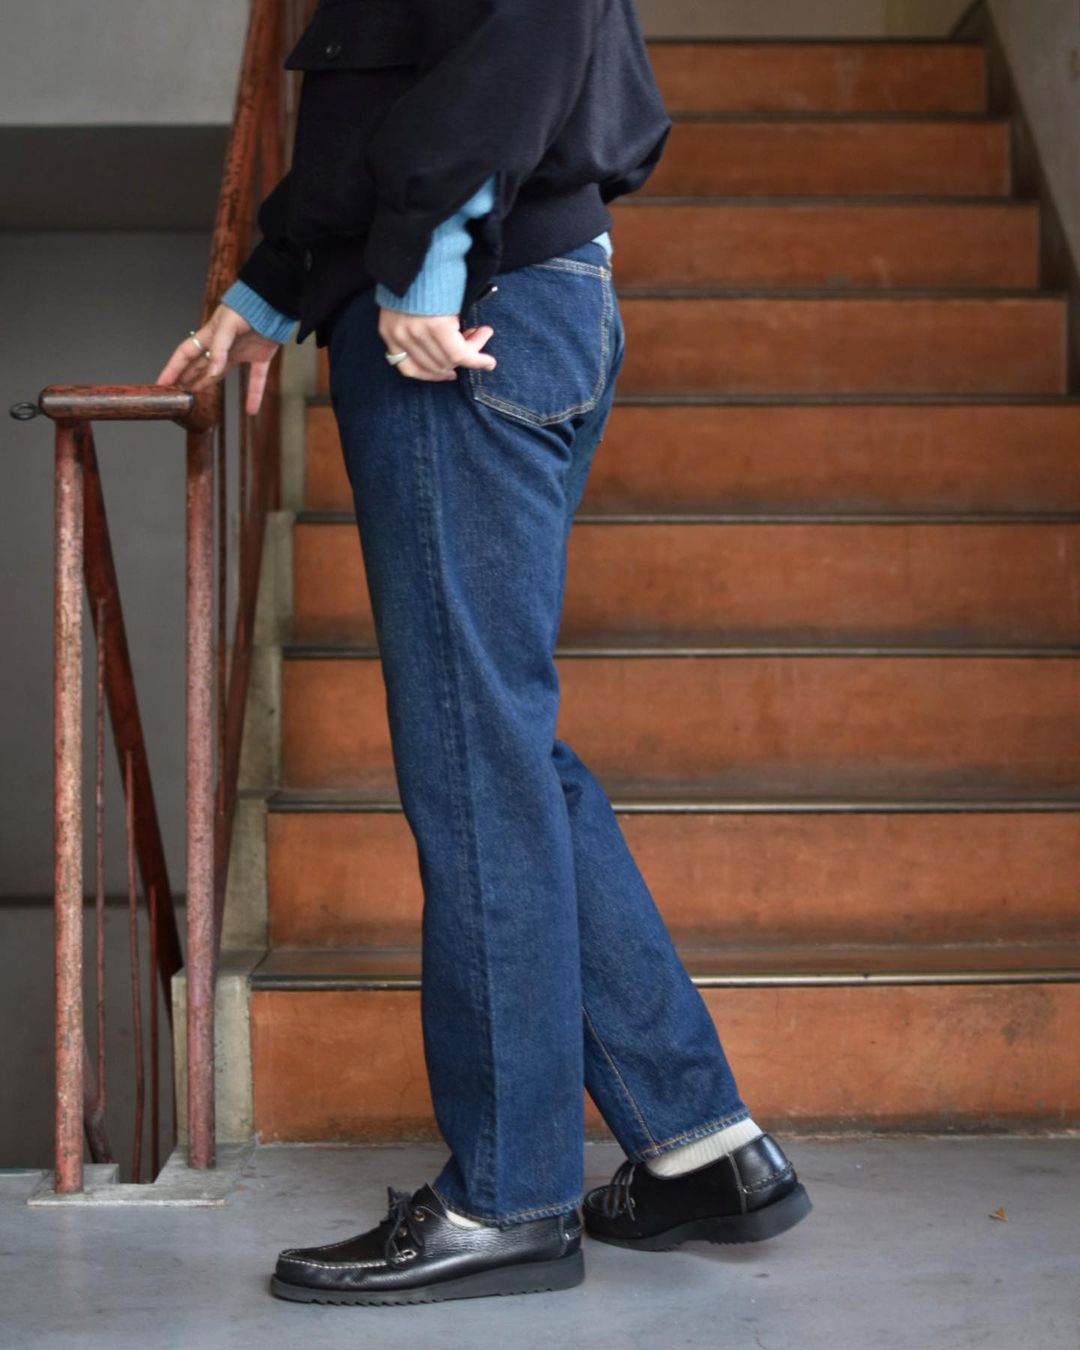 A.PRESSE(アプレッセ) / Washed Denim Pants E | 公式通販・JACK in ...